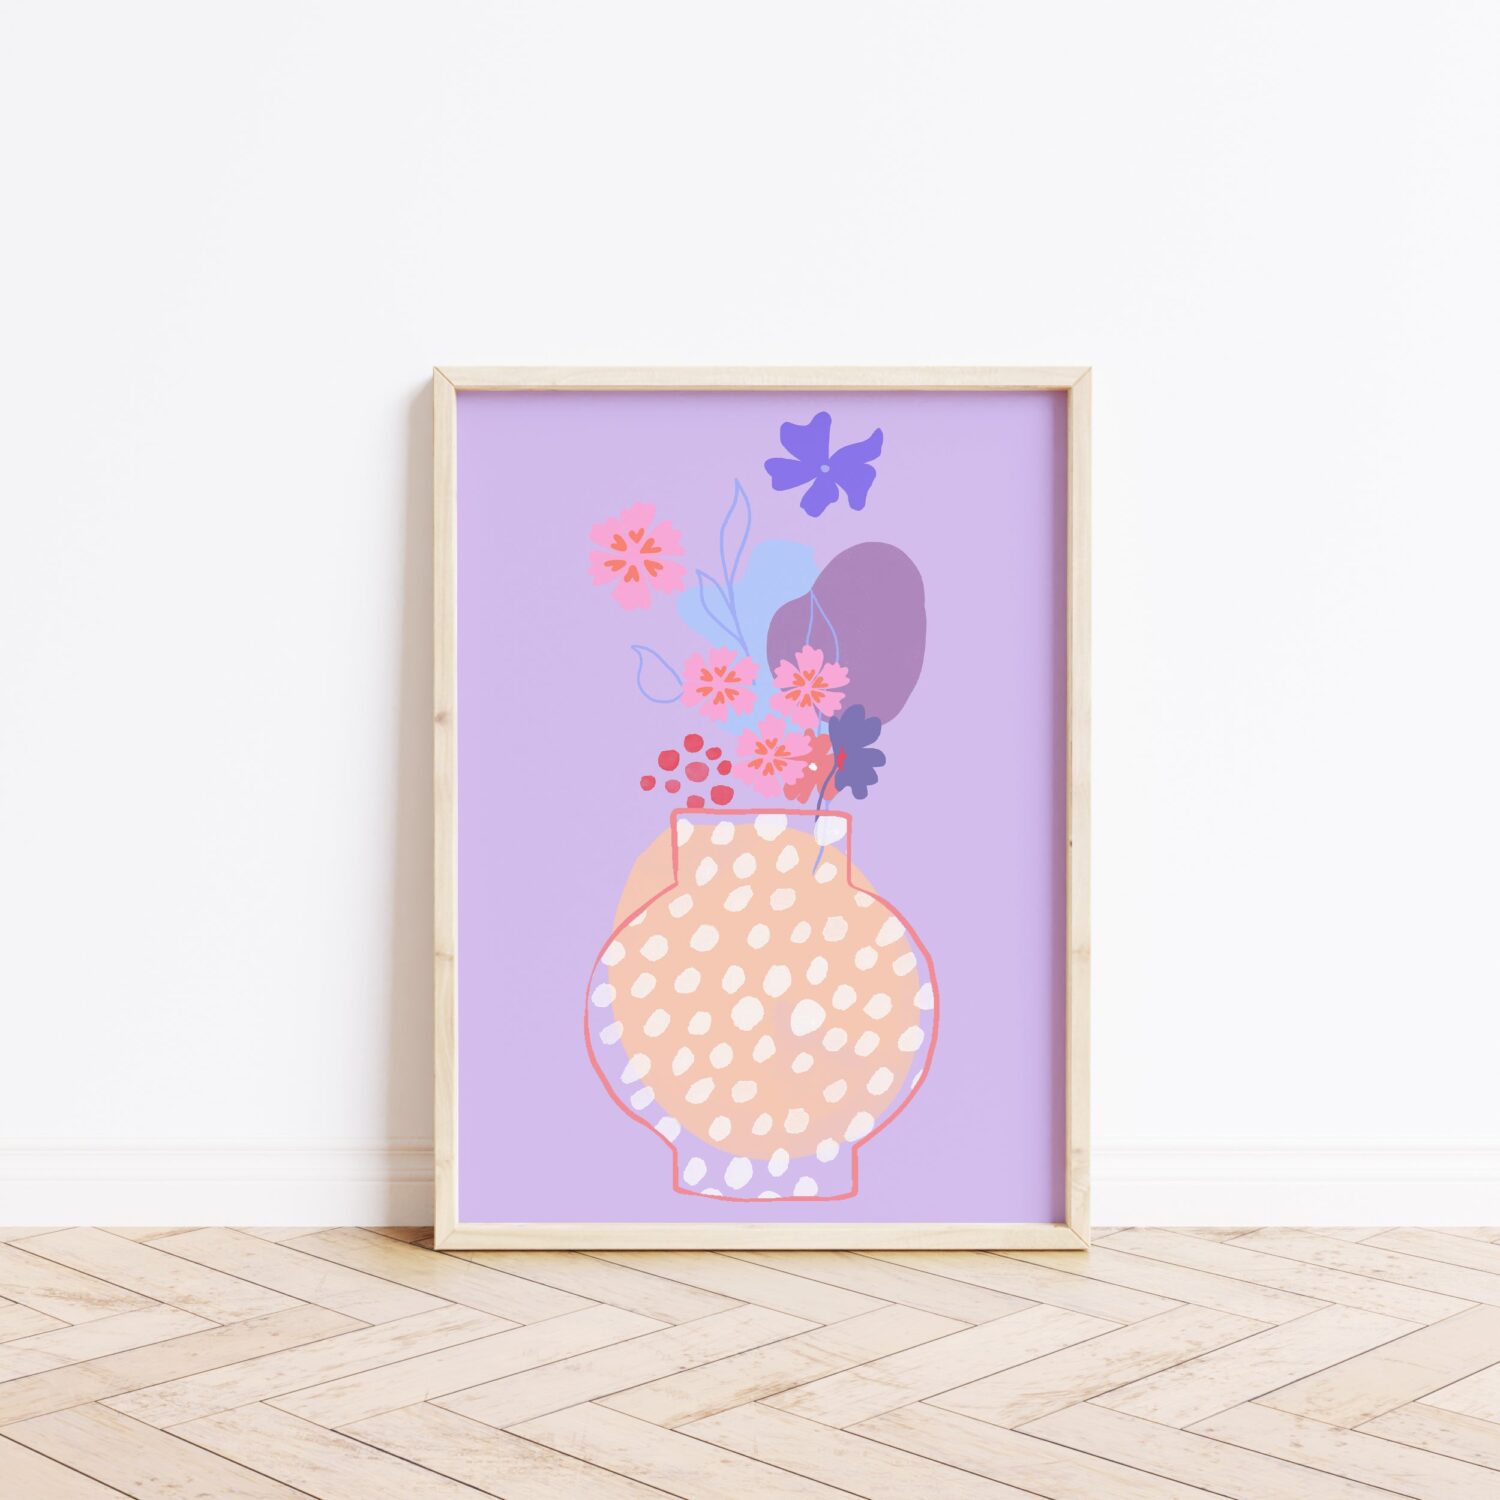 bang on trend lilac art print. colourful cool art print. flowers in vase art in frame